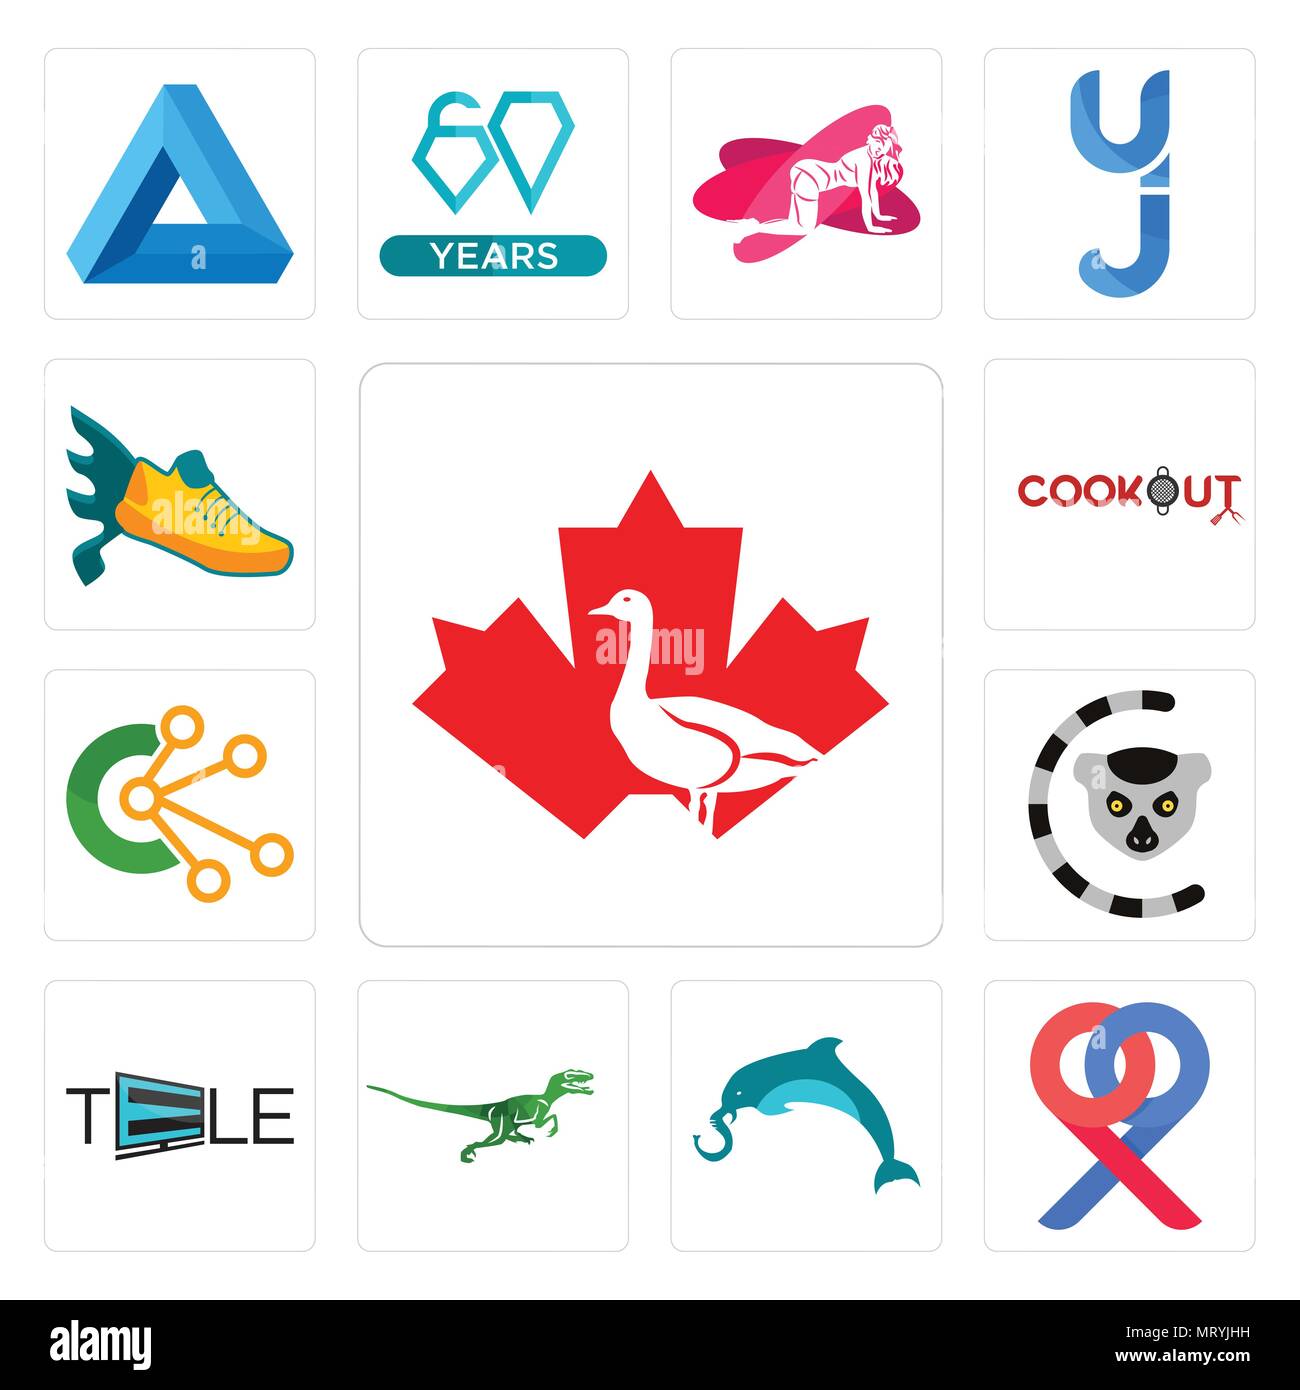 Set Of 13 simple editable icons such as canada goose, double p, elephand dolphin, velociraptor, tele, lemur, comunication, cookout, flying shoe can be Stock Vector